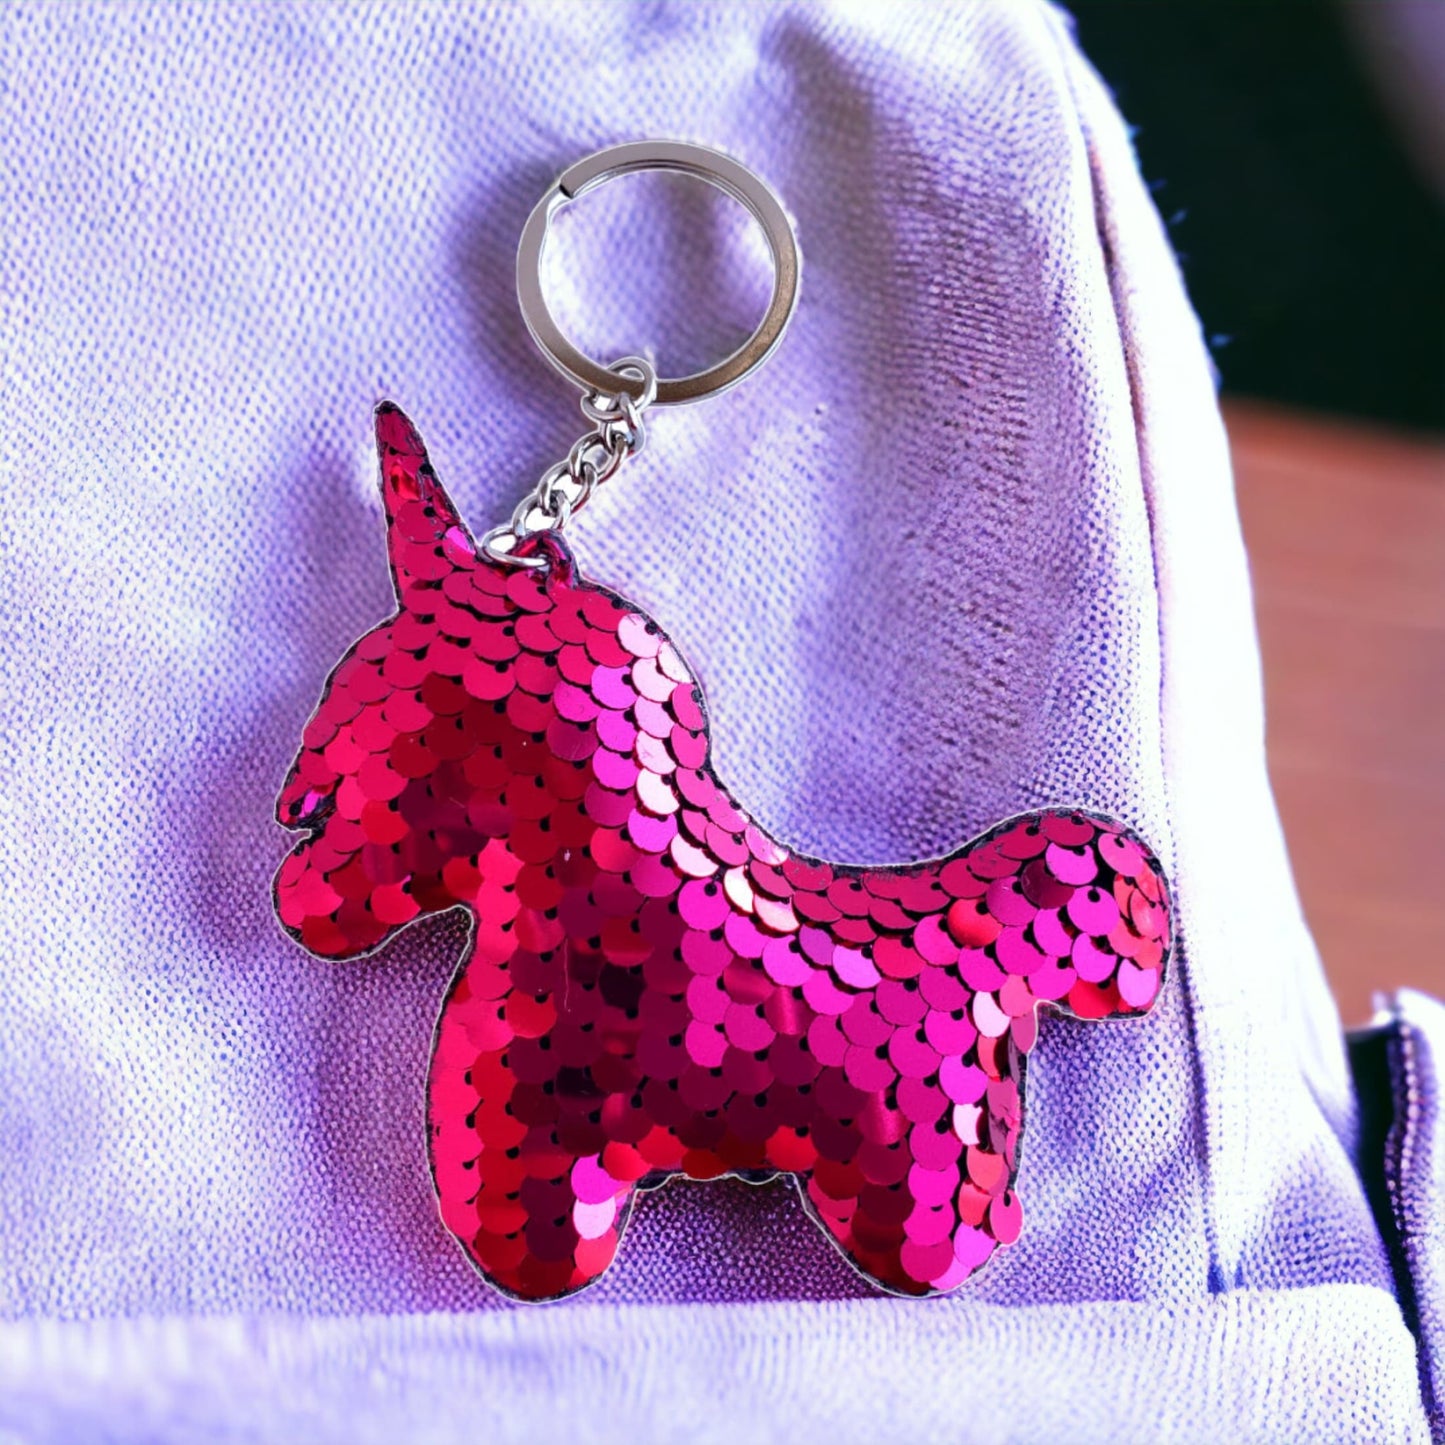 Sequin Unicorn Bag Charm Keychain from Confetti Kitty, Only 2.99